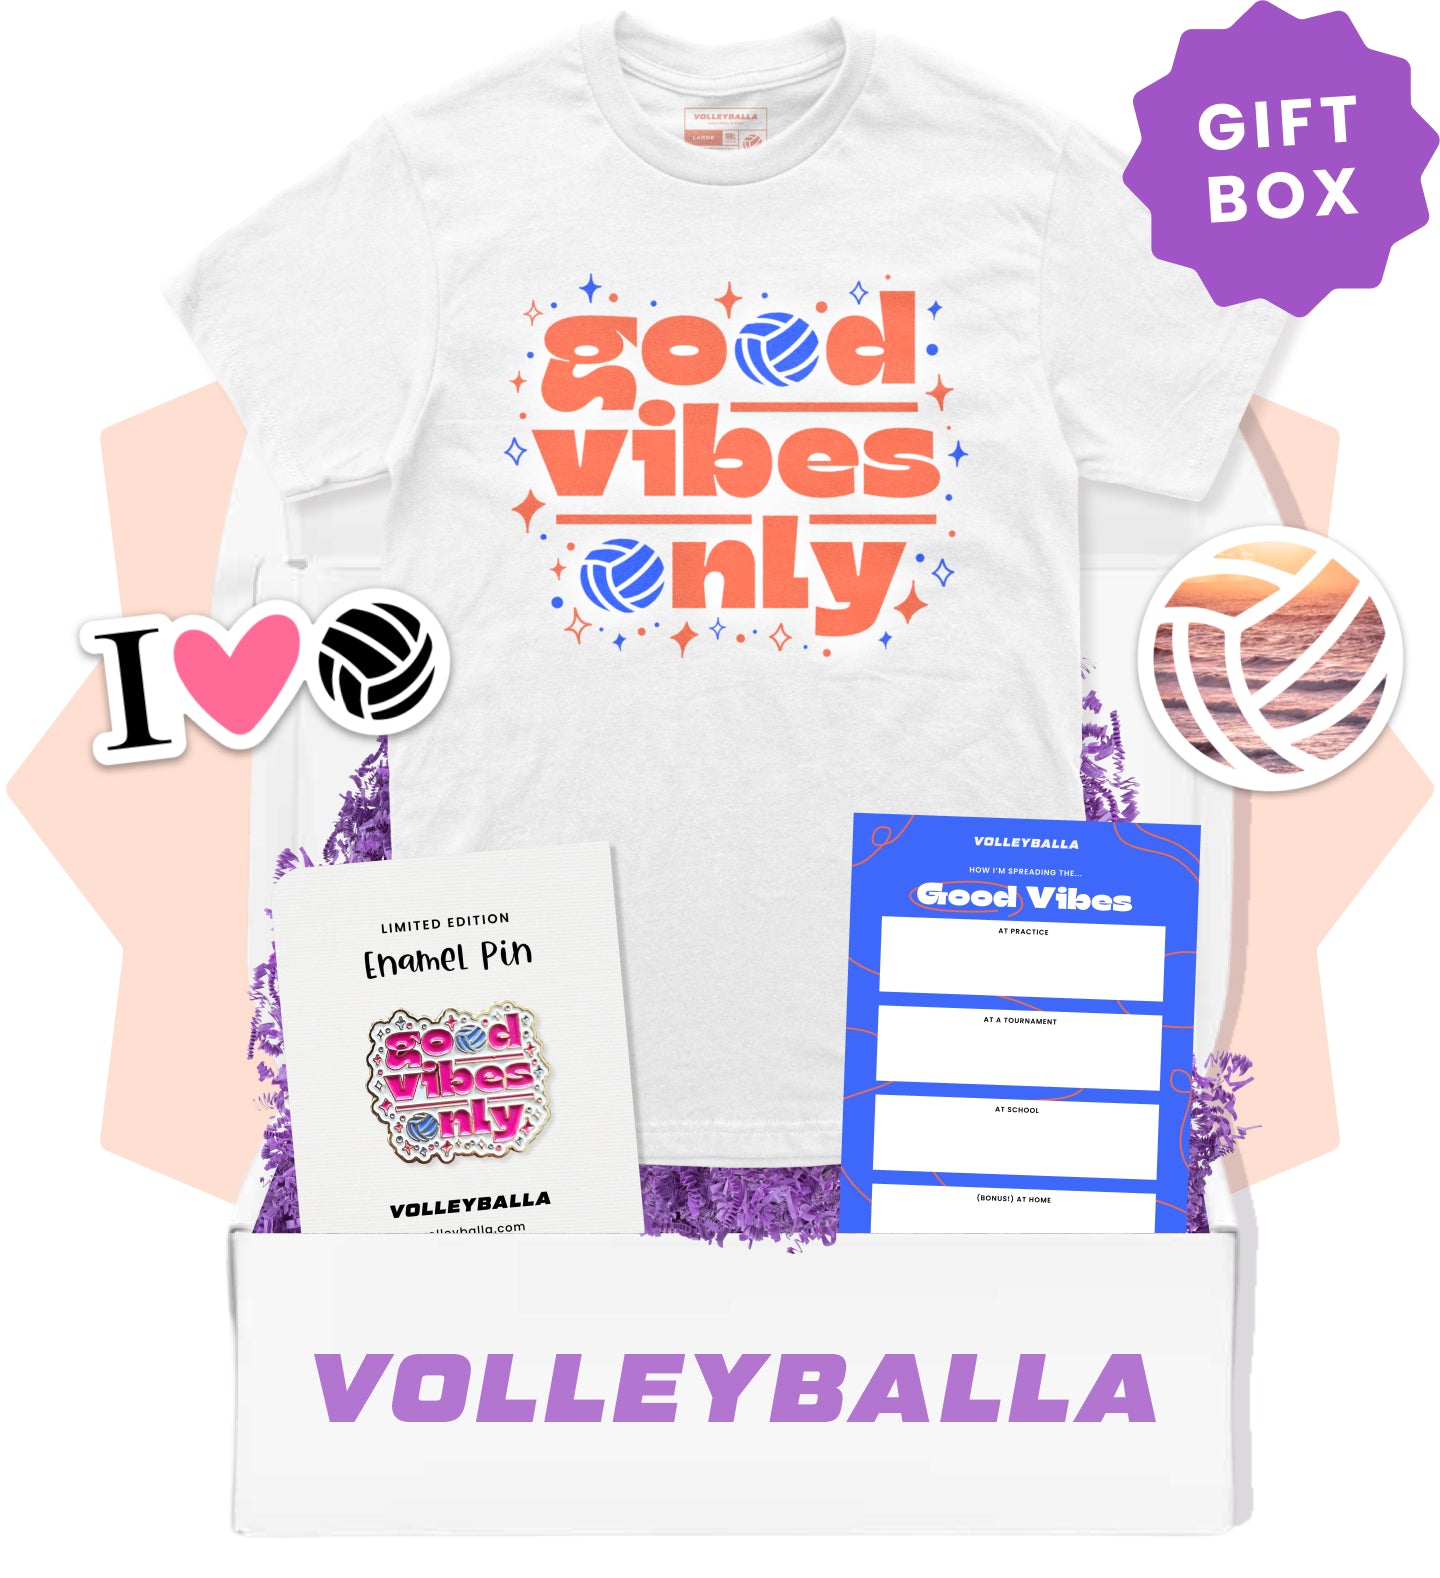 Good Volleyball Vibes - Volleyball Gift Box